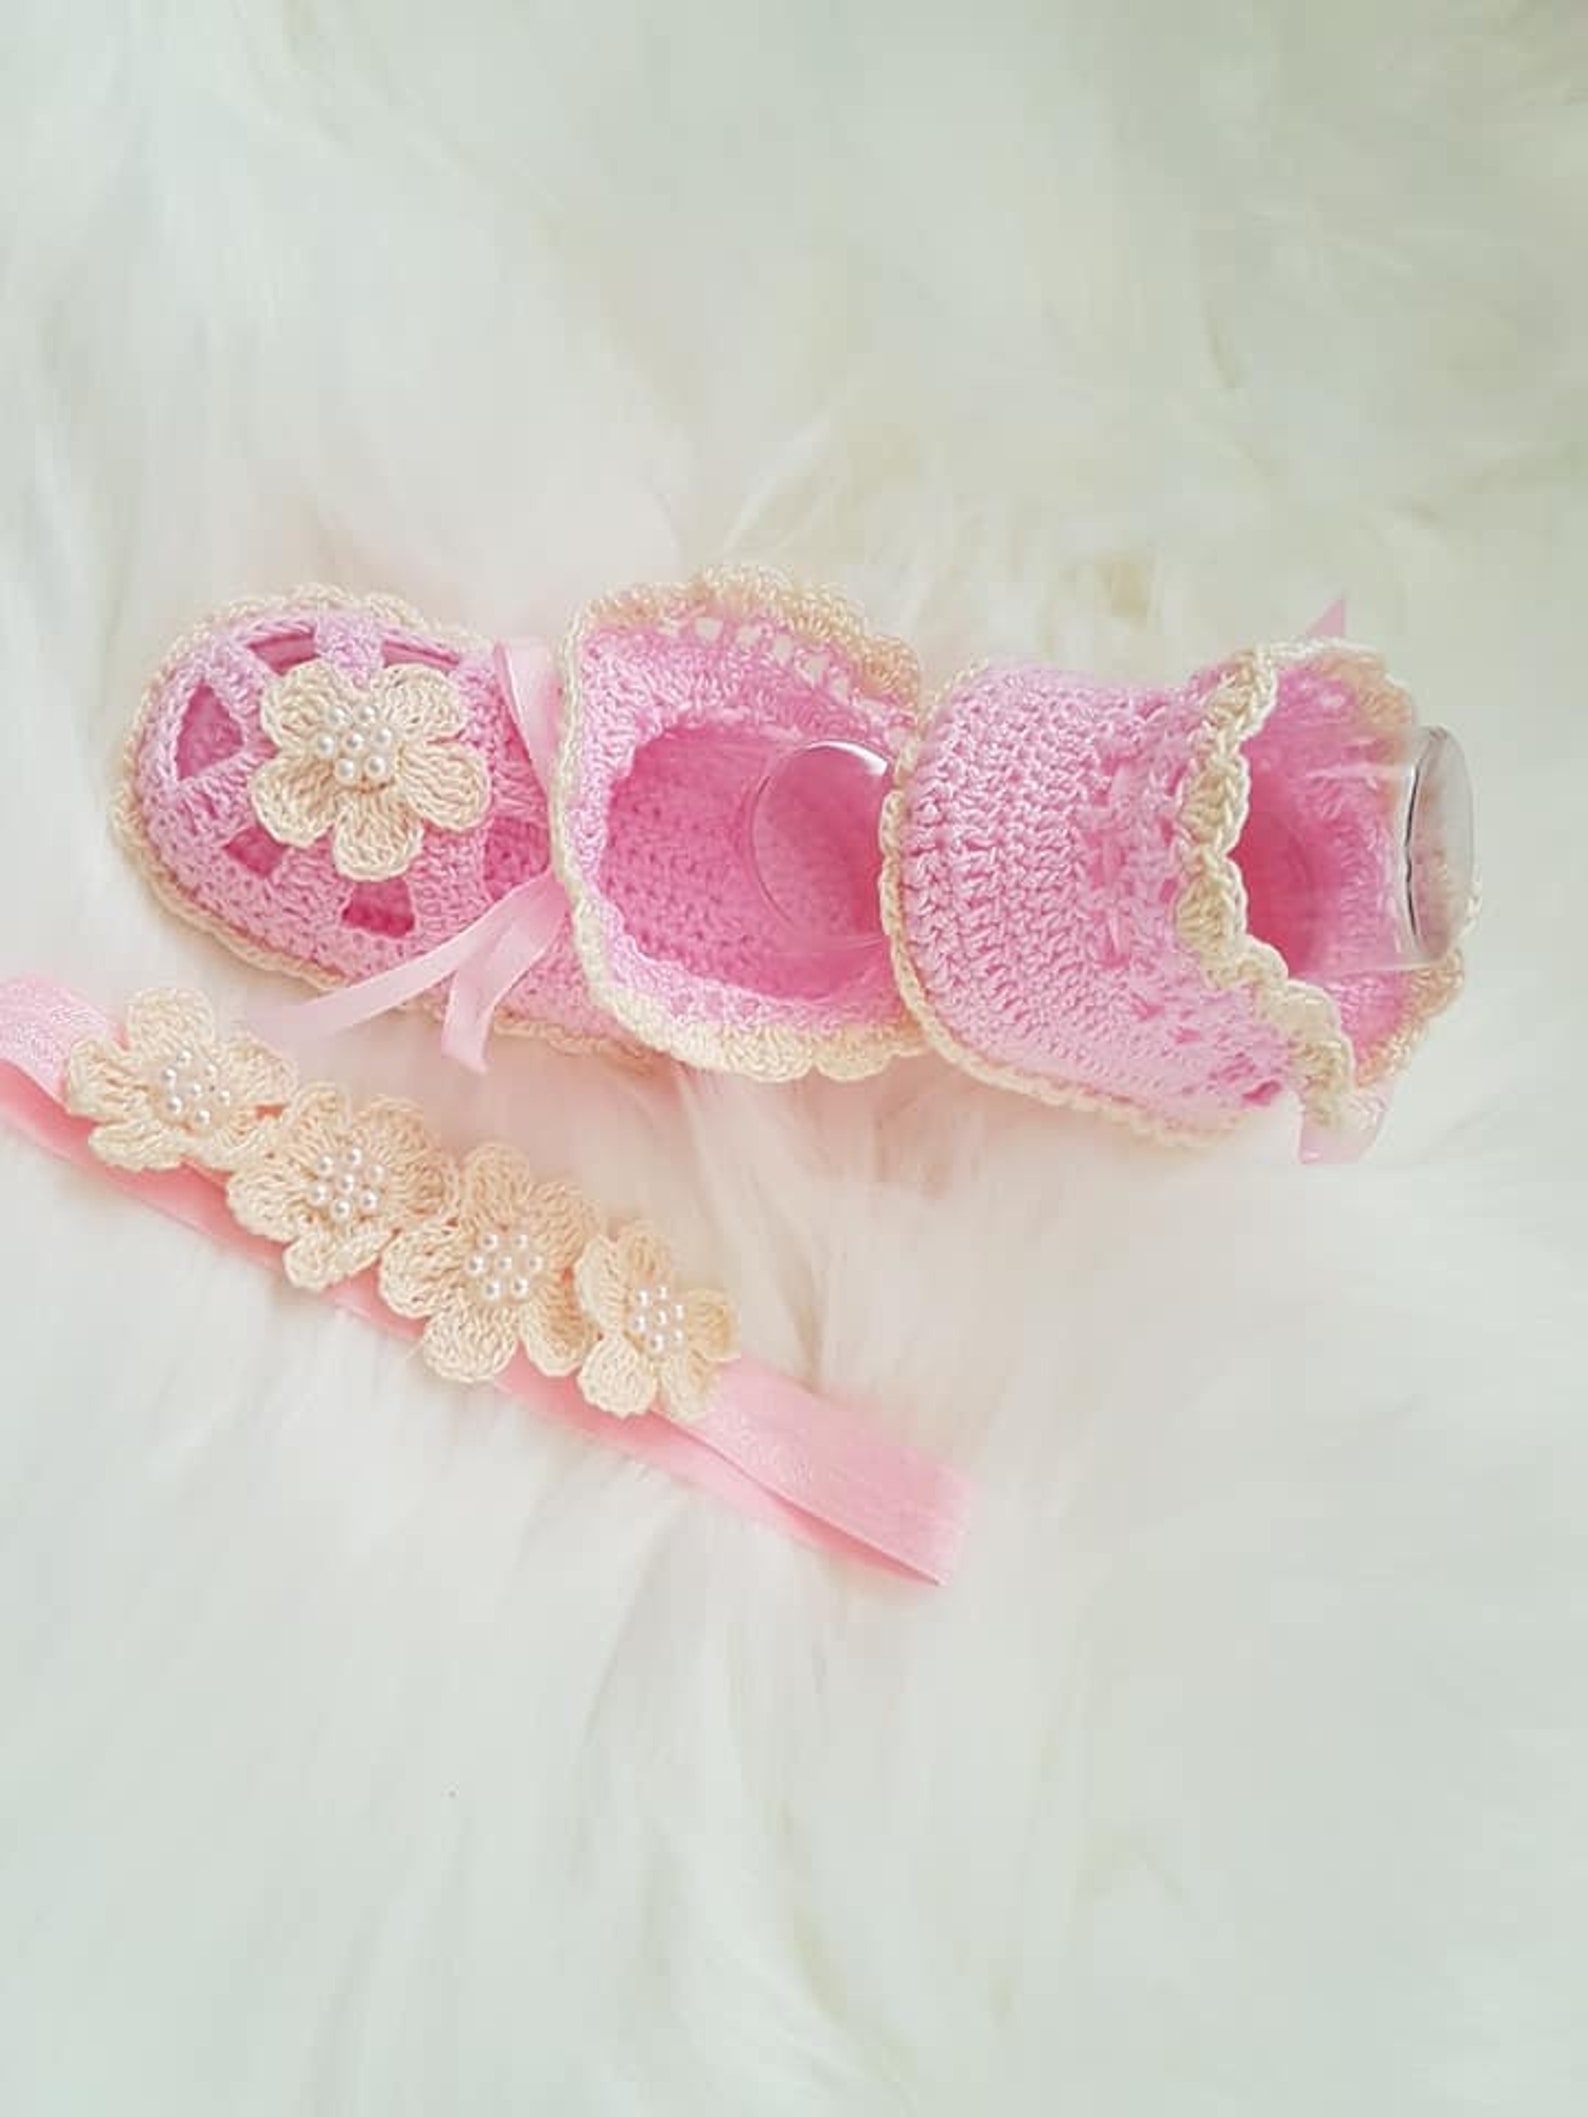 crochet baby booties, baby girl ballet slippers. crochet baby shoes with flower for newborn to 06 months